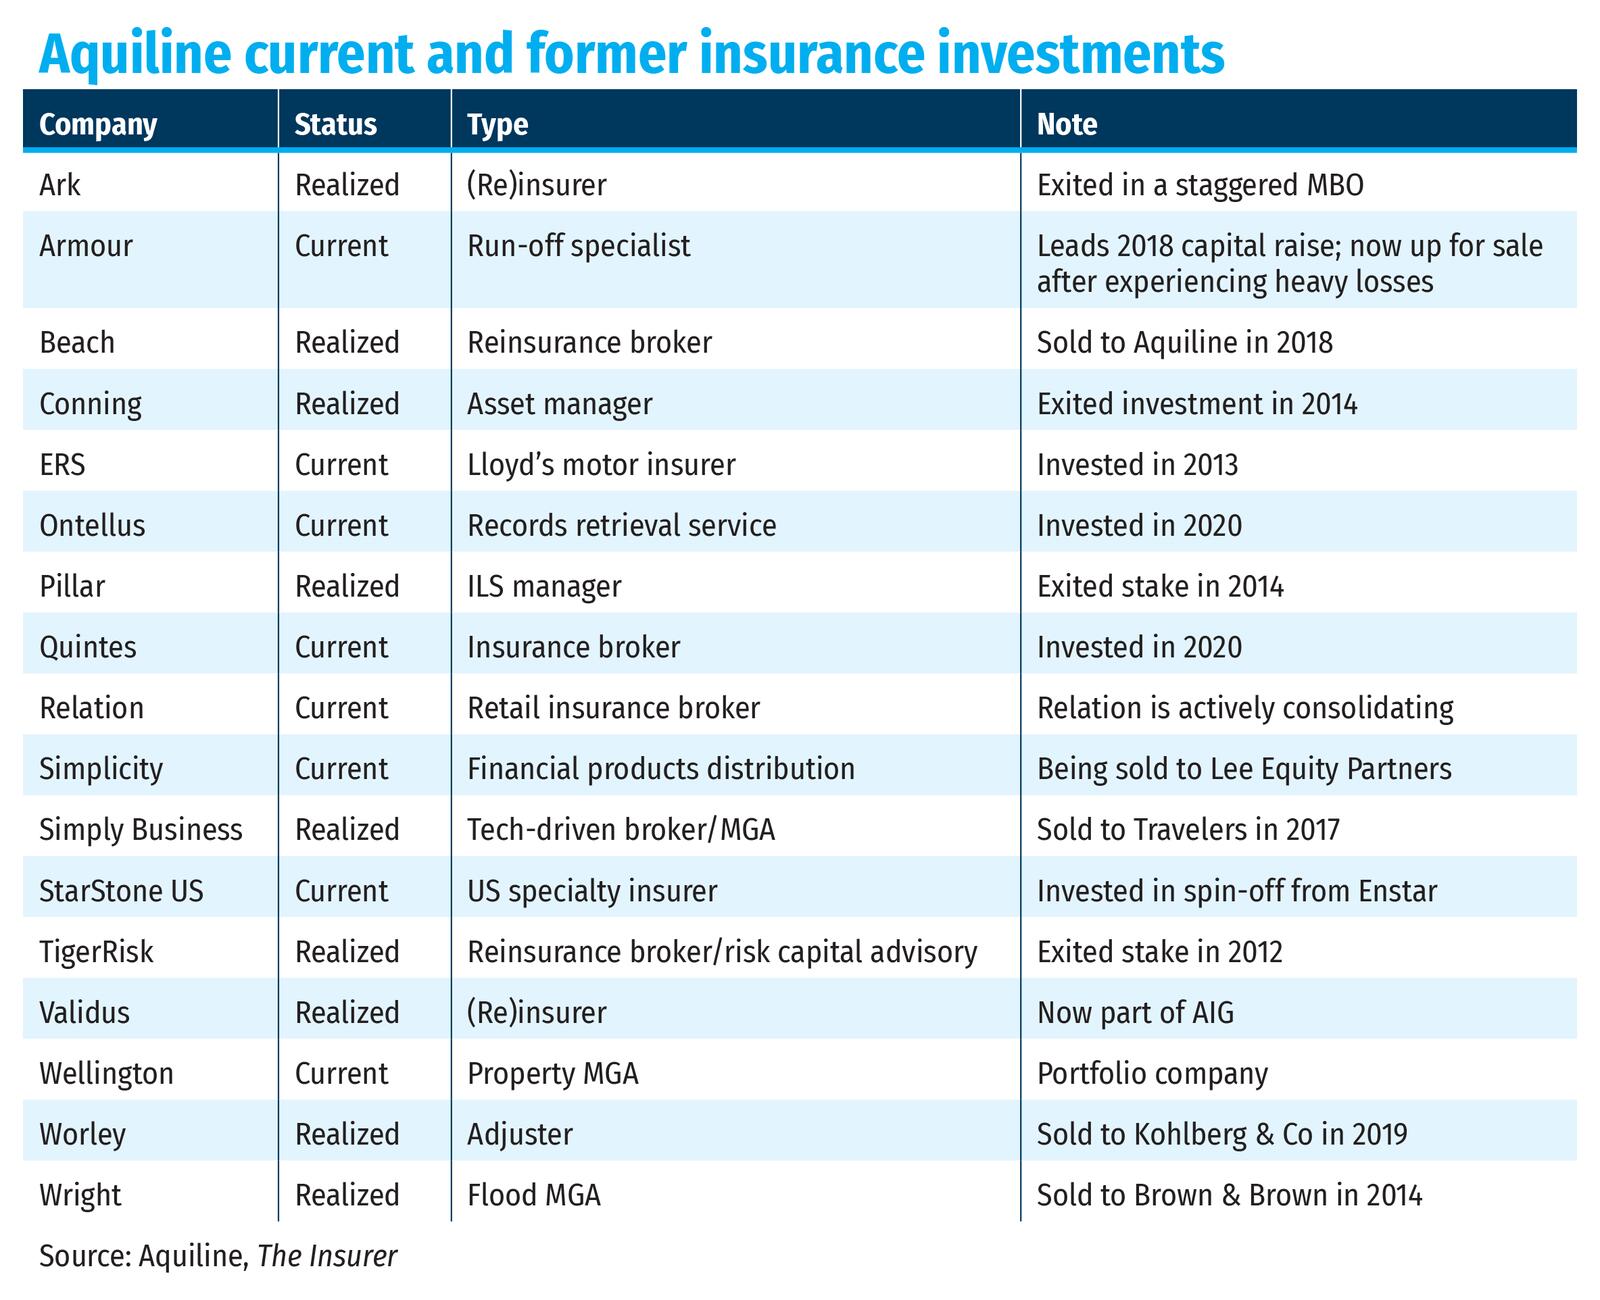 Aquiline current and former insurance investments